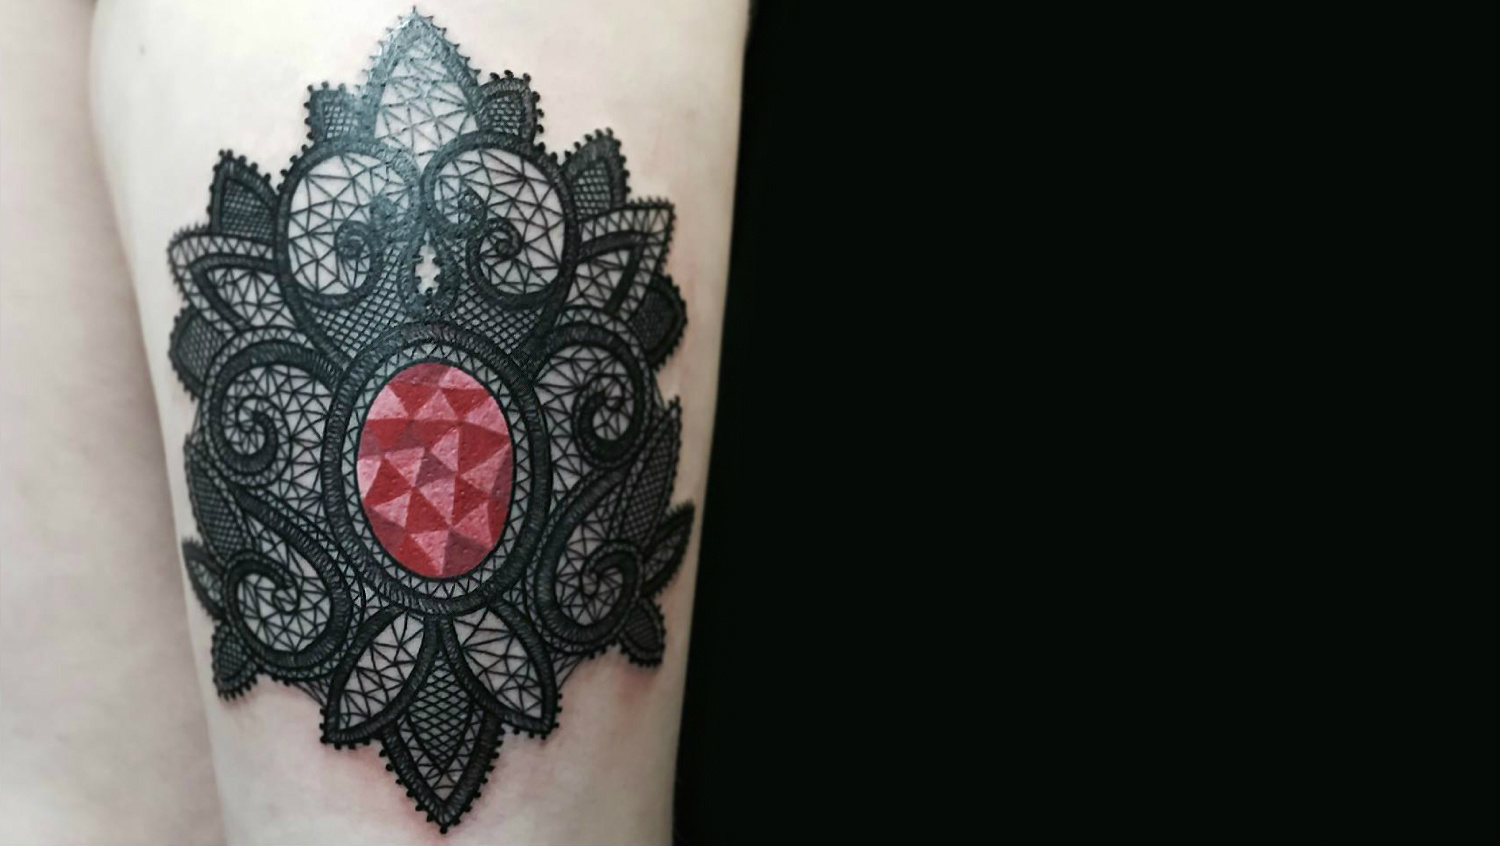 lace amulet tattoo by falukorv